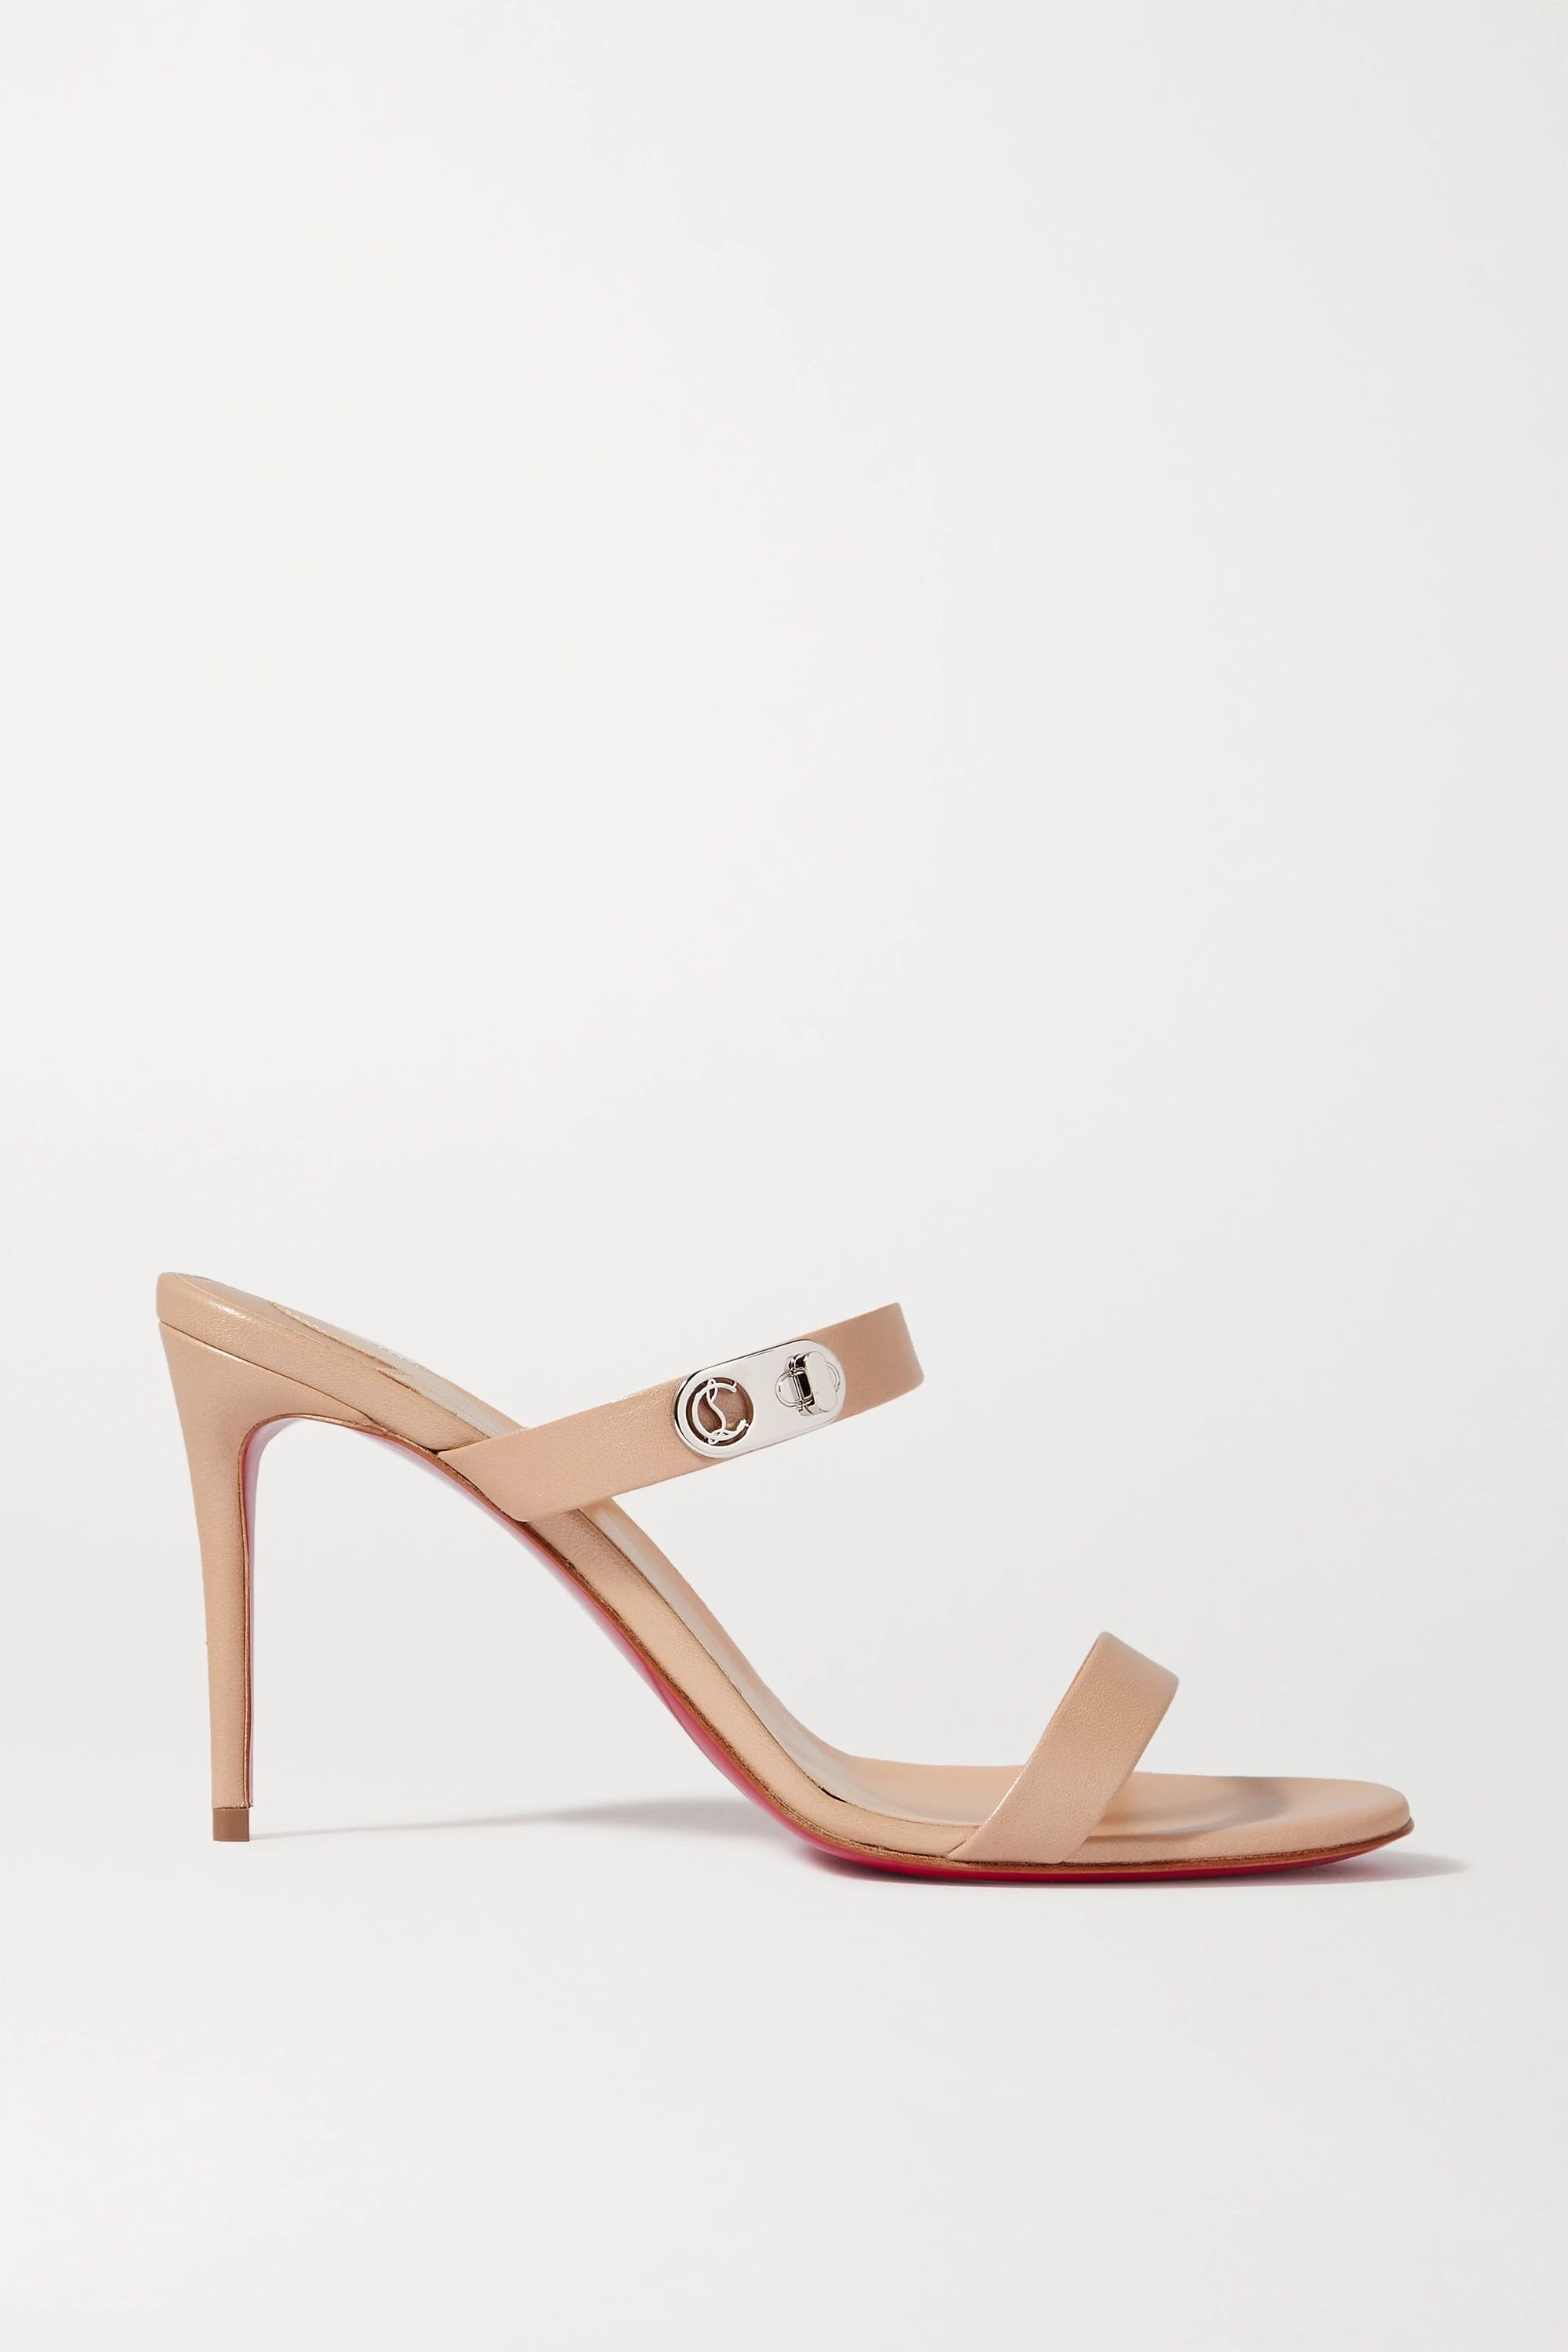 Neutral Lock Me 85 embellished leather mules | Christian Louboutin | NET-A-PORTER | NET-A-PORTER (US)